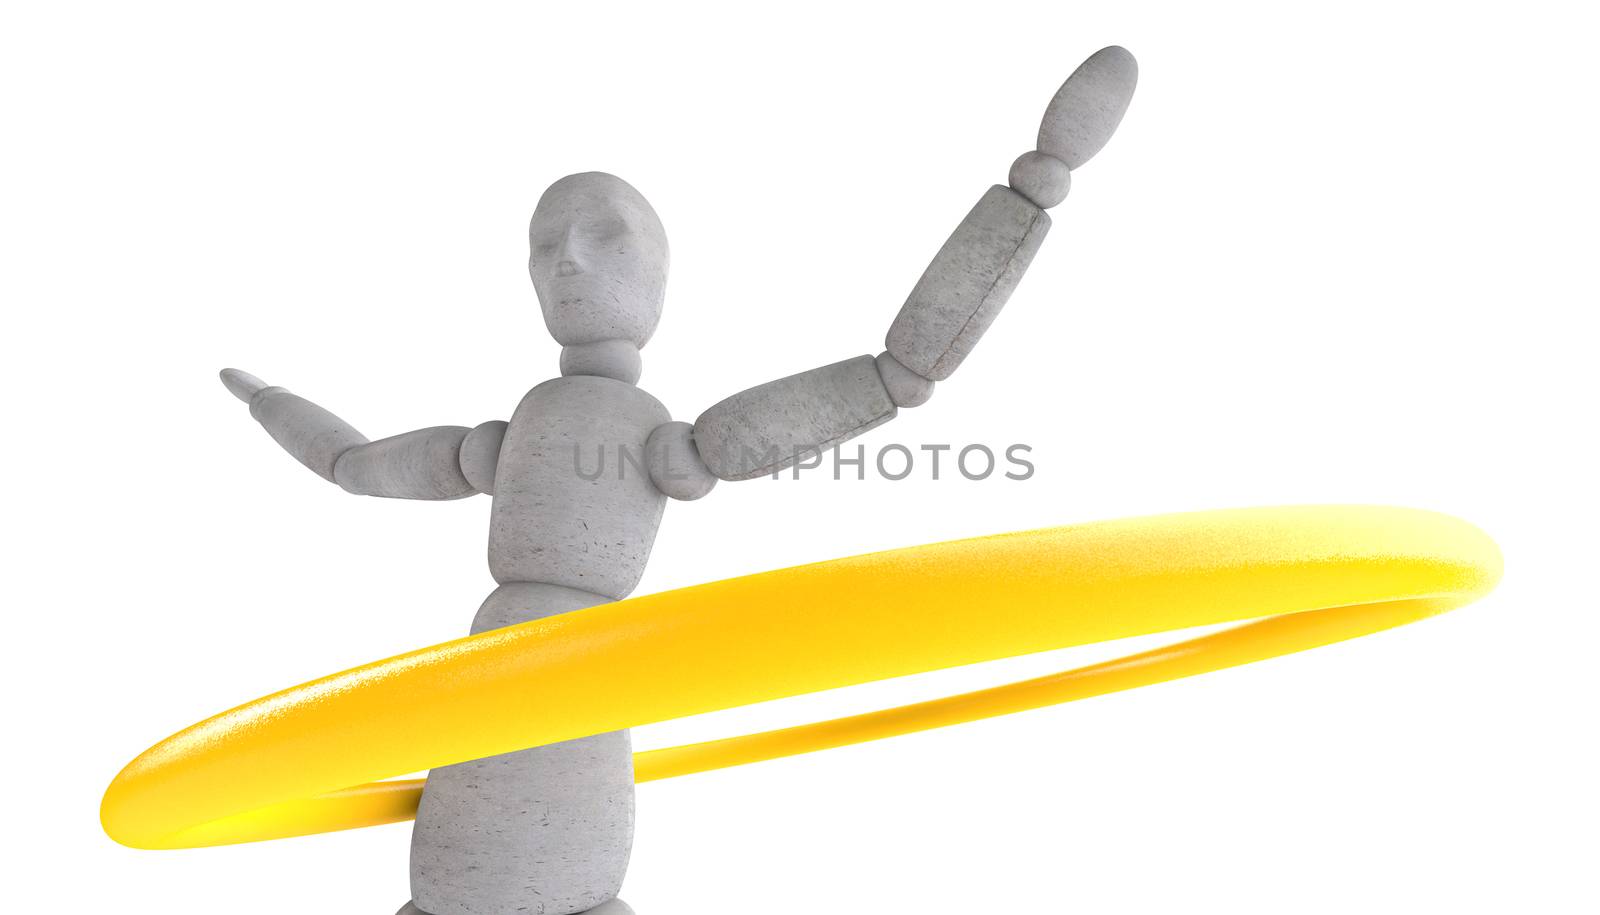 3d puppet model standing feet shoulder width apart, arms spread wide and turns yellow hoop with different camera angles and different focal lengths